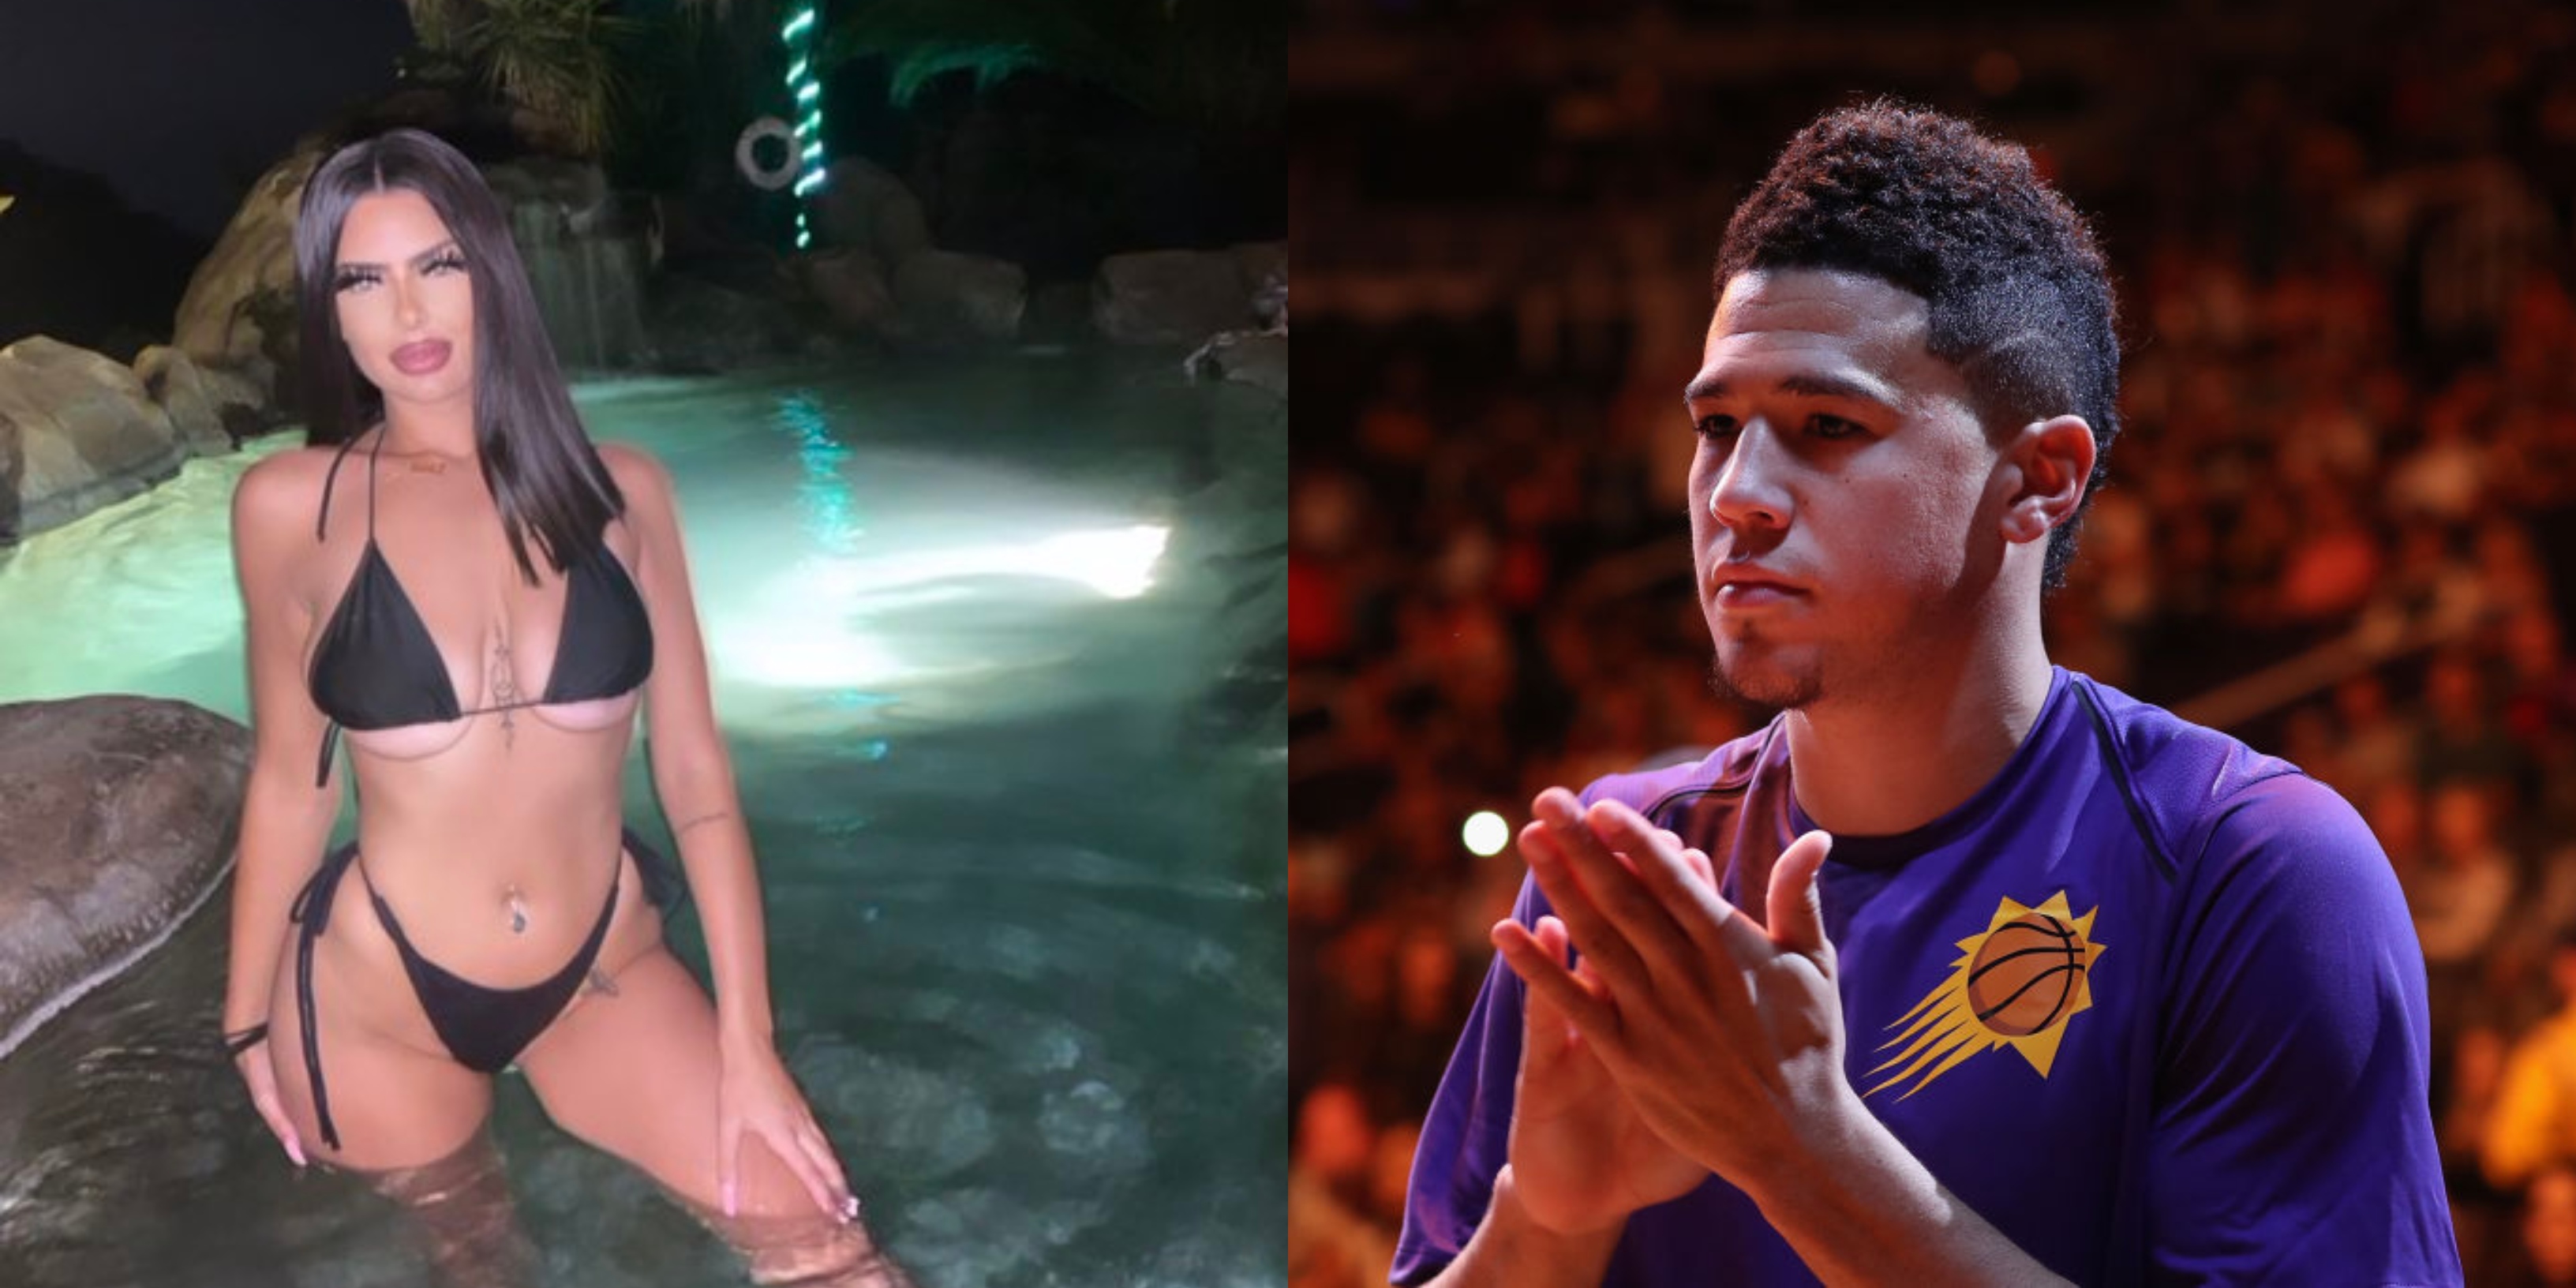 IG Model Claims Devin Booker Was Part of 7 Players She Gave Oral To In Hote...